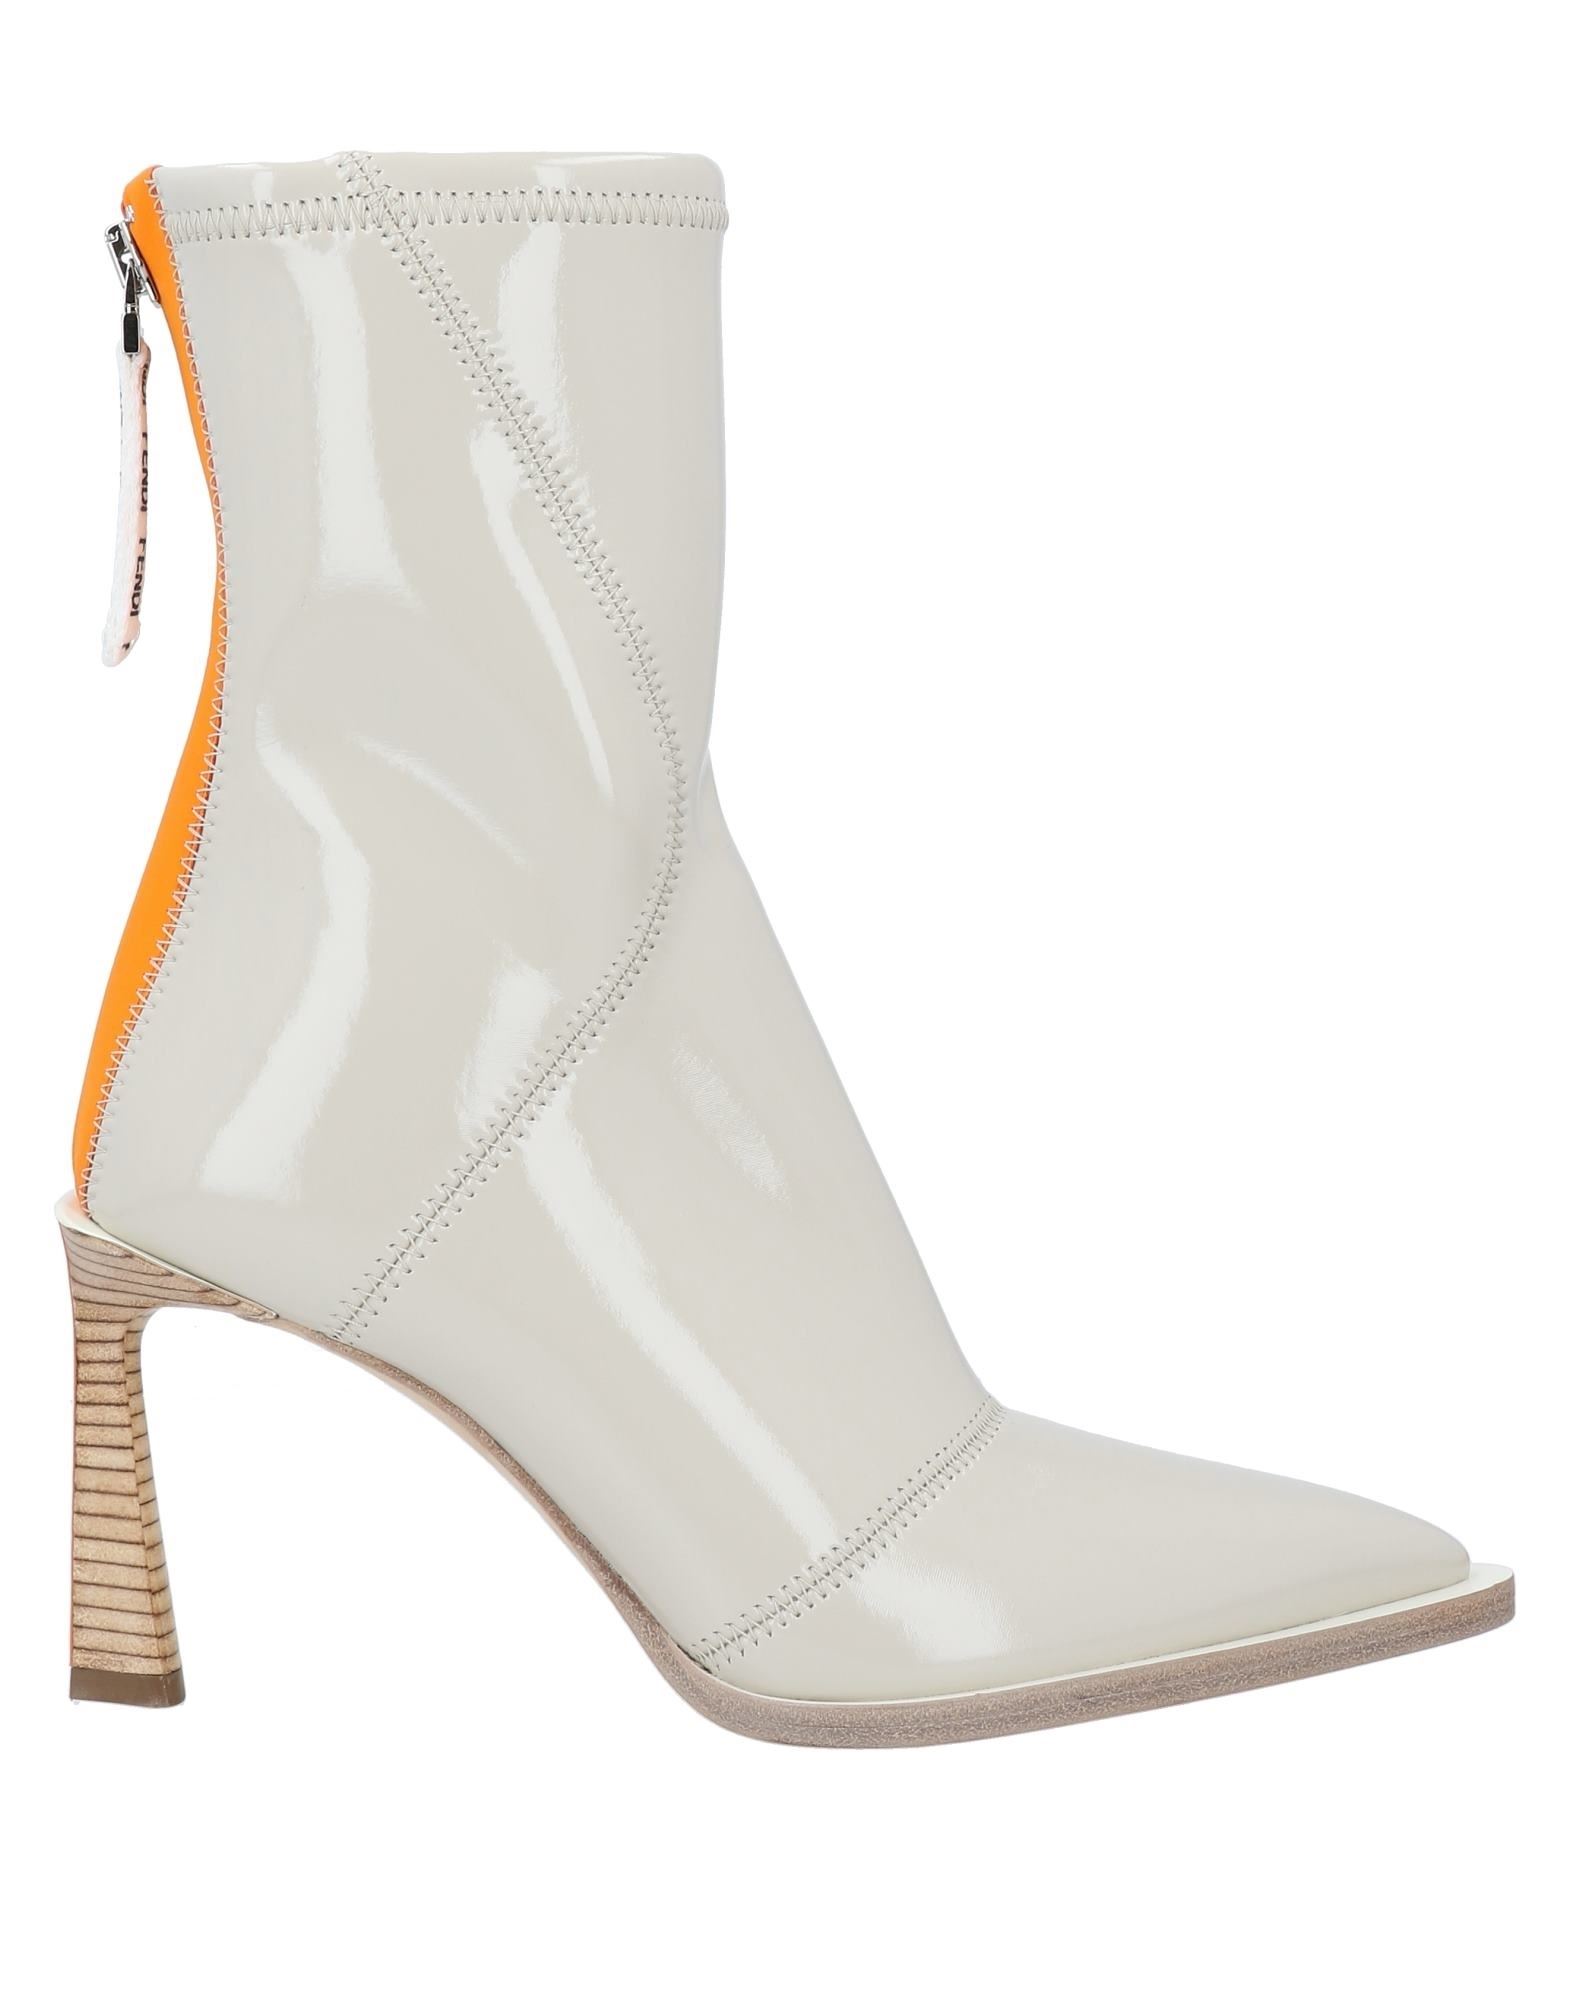 FENDI Boots On Sale, Up To 70% Off | ModeSens